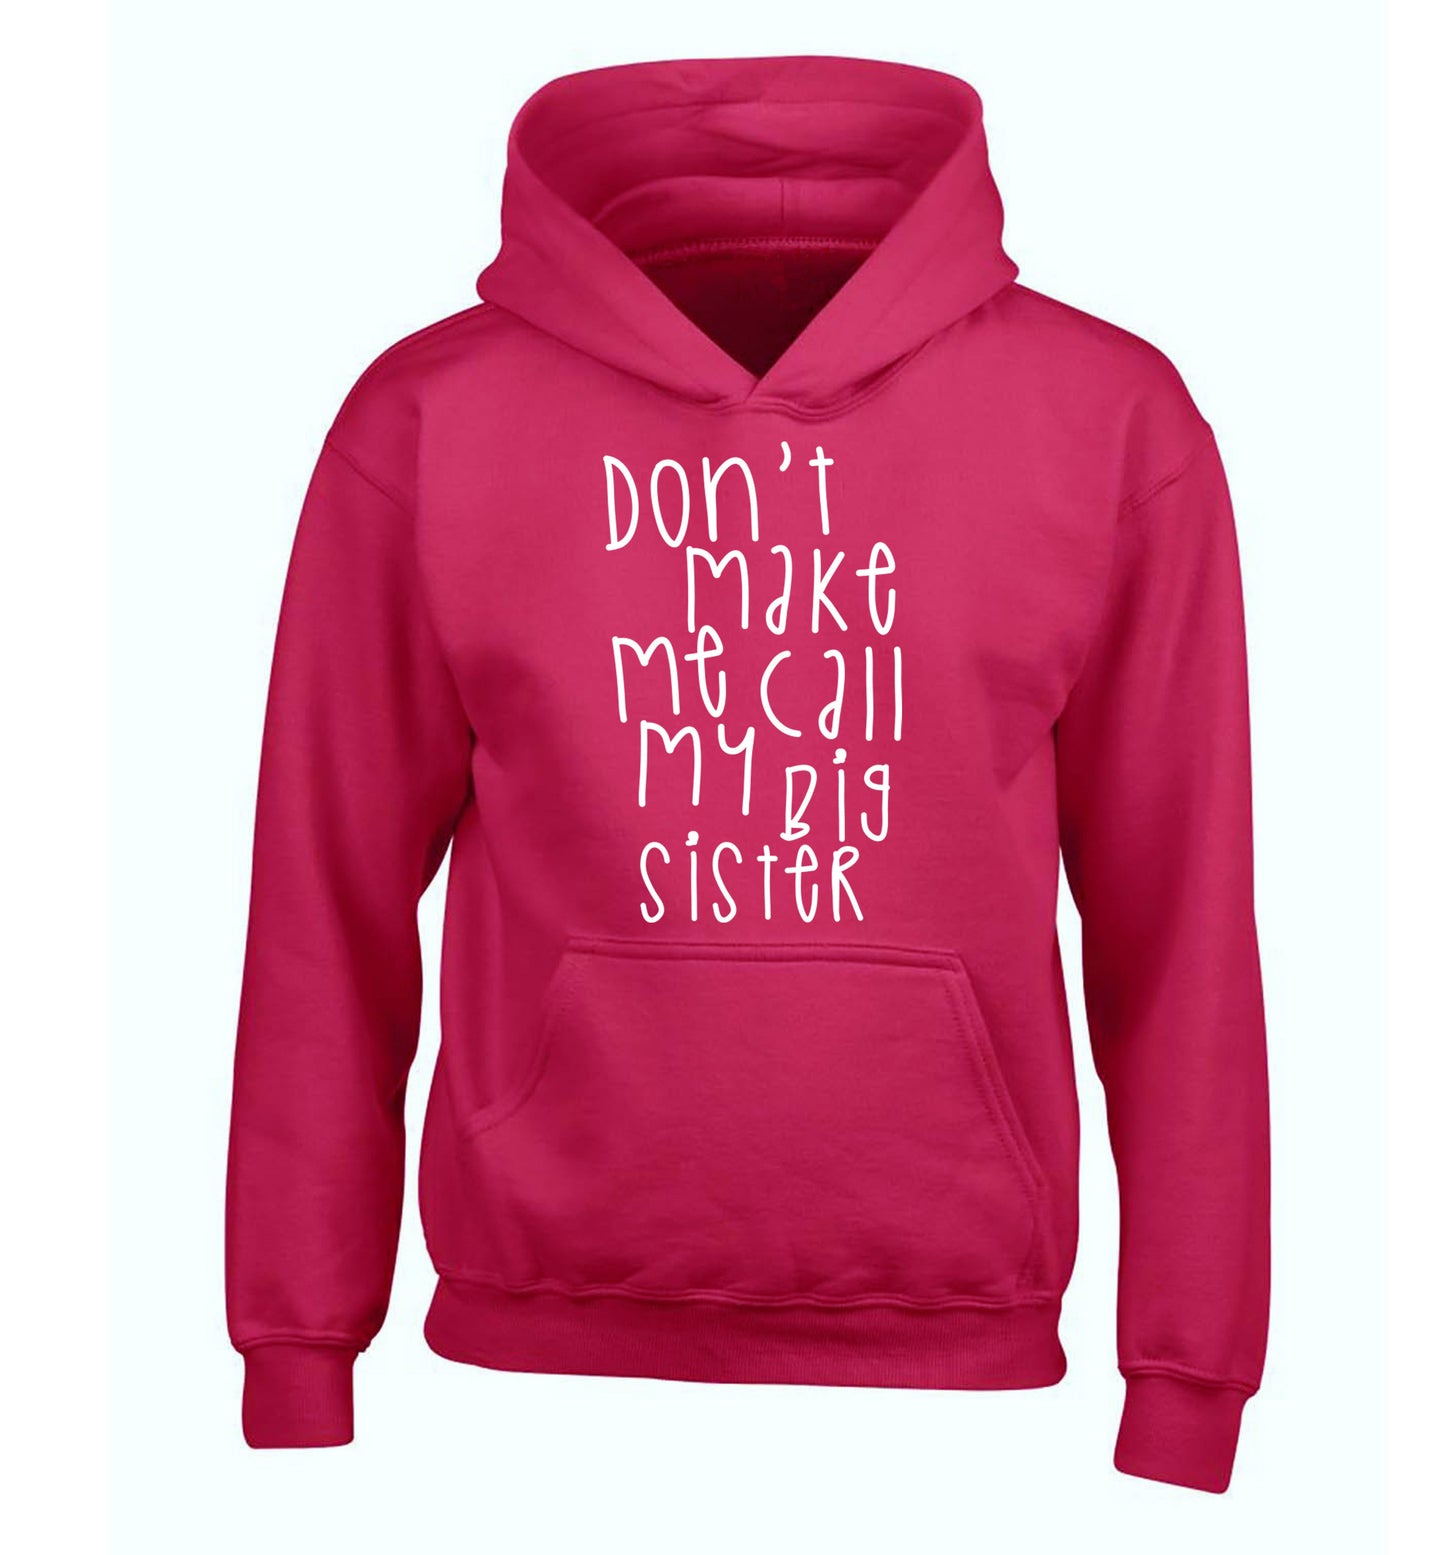 Don't make me call my big sister children's pink hoodie 12-14 Years